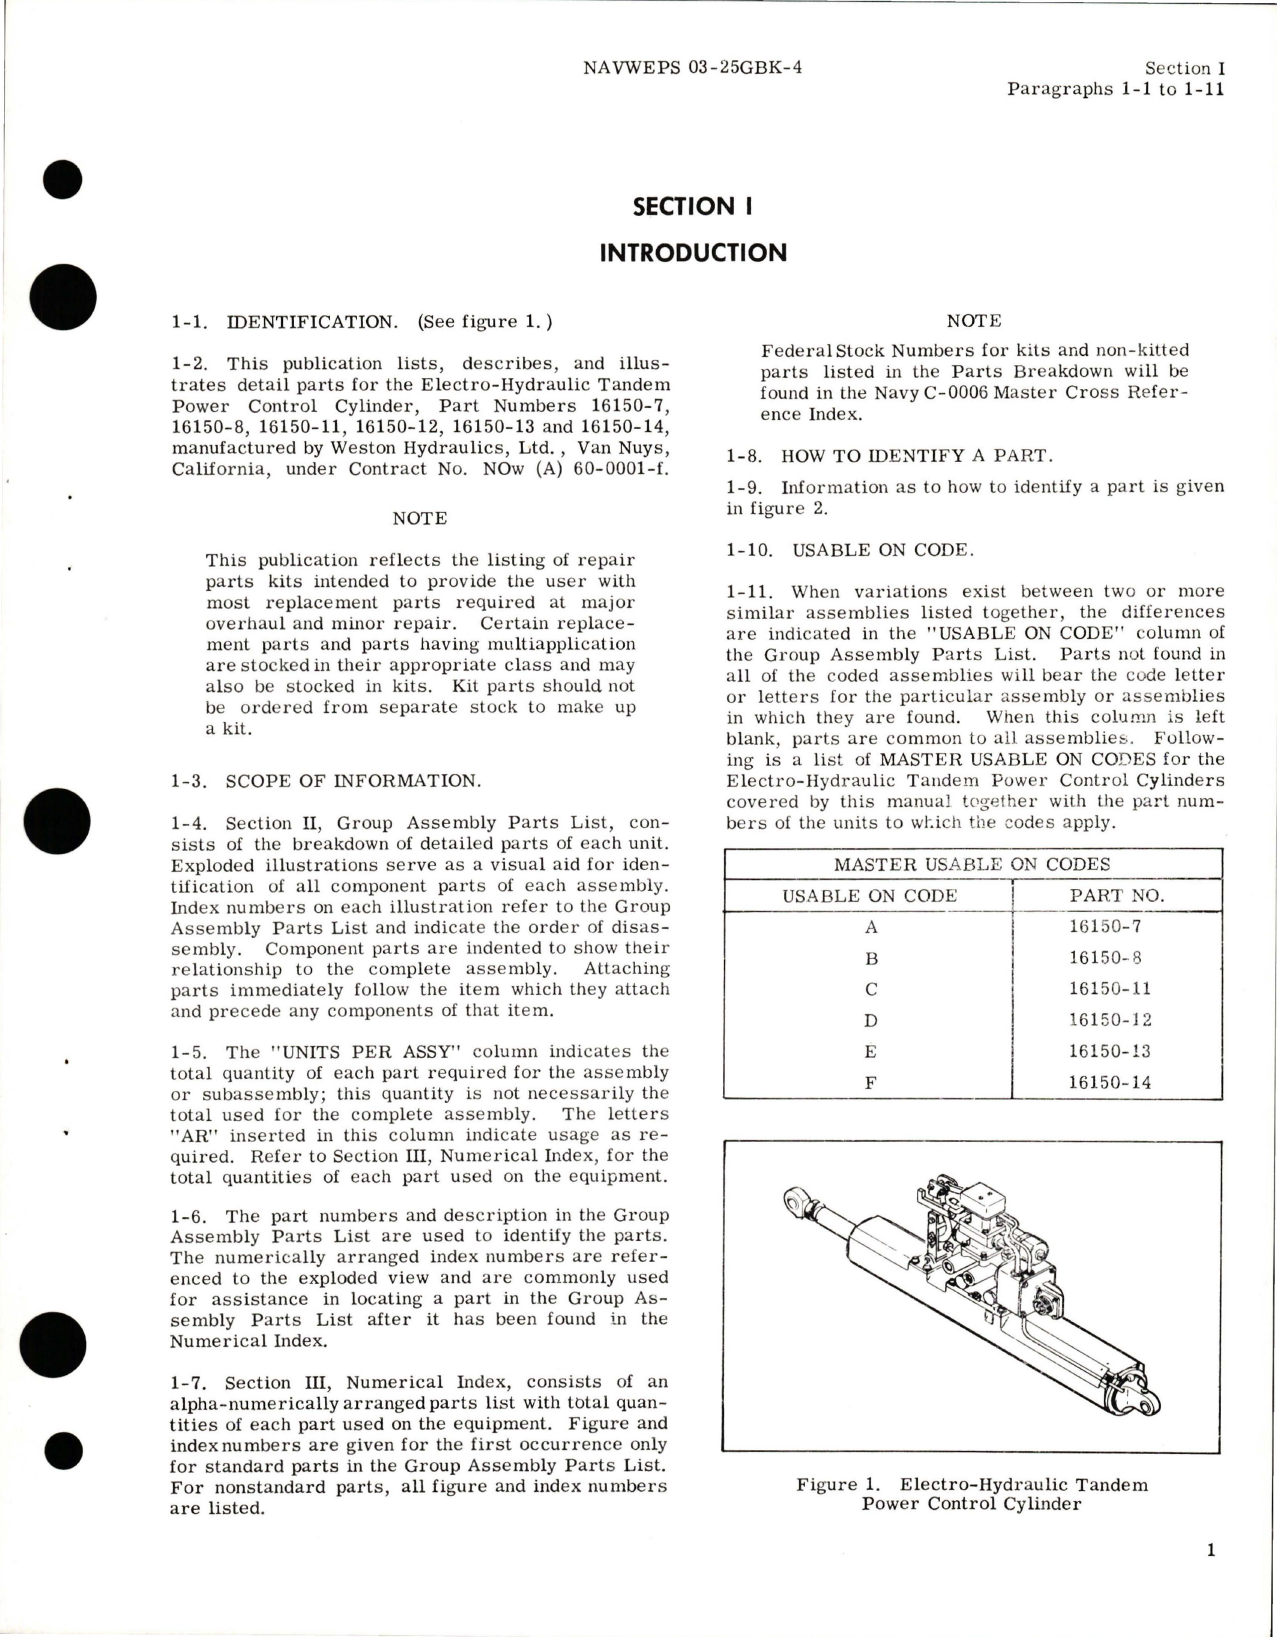 Sample page 5 from AirCorps Library document: Illustrated Parts Breakdown for Electro-Hydraulic Tandem Power Control Cylinder - Parts 16150-7, 16150-8, 16150-11, 16150-12, 16150-13, and 16150-14